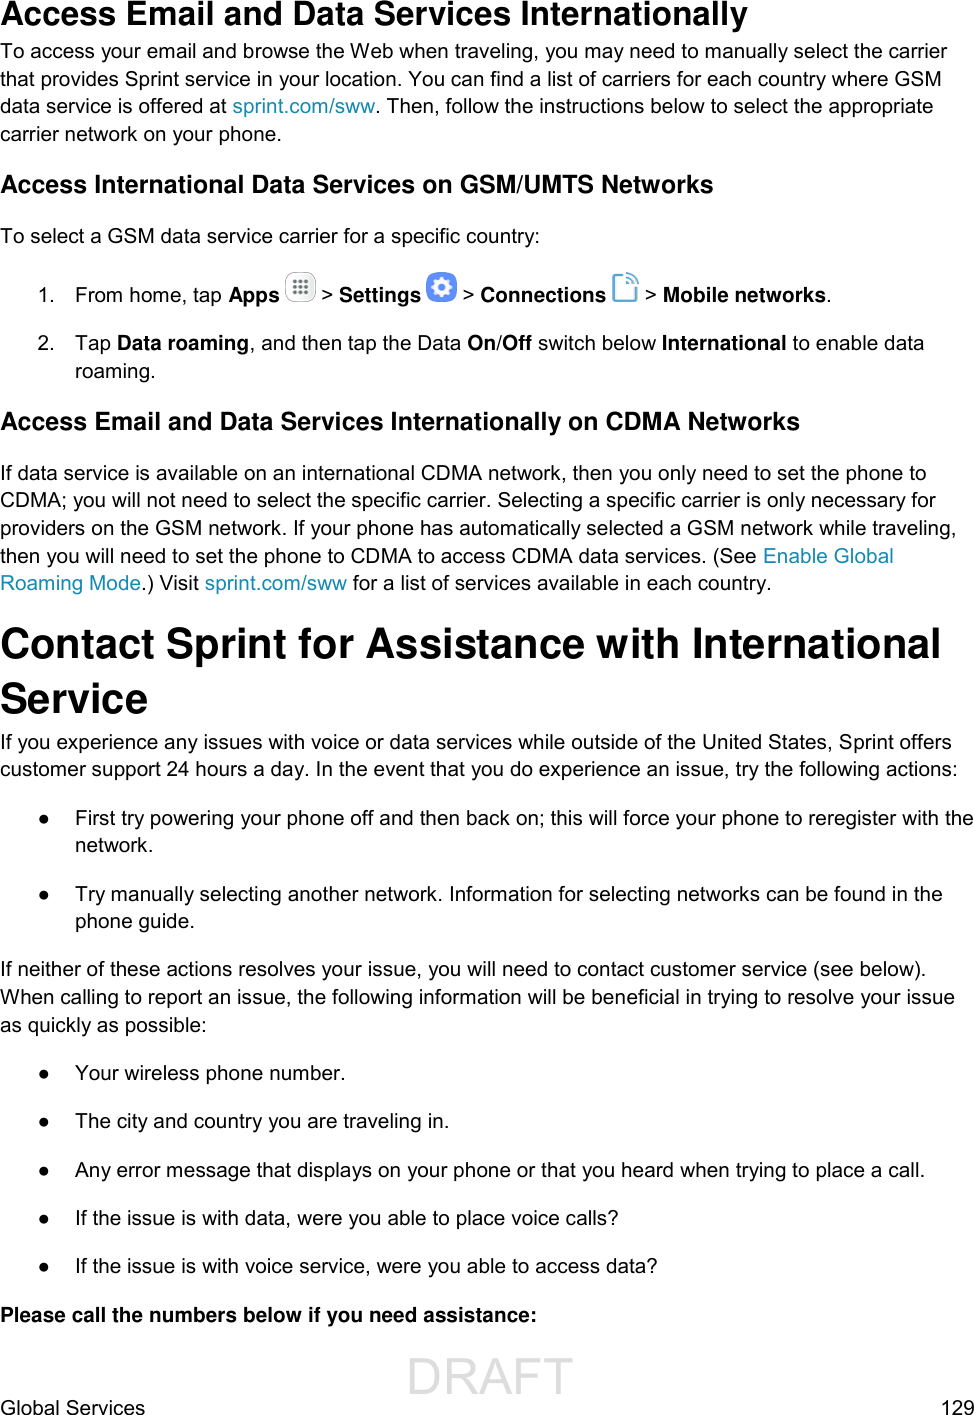                  DRAFT FOR INTERNAL USE ONLYGlobal Services  129 Access Email and Data Services Internationally  To access your email and browse the Web when traveling, you may need to manually select the carrier that provides Sprint service in your location. You can find a list of carriers for each country where GSM data service is offered at sprint.com/sww. Then, follow the instructions below to select the appropriate carrier network on your phone. Access International Data Services on GSM/UMTS Networks To select a GSM data service carrier for a specific country:  1.  From home, tap Apps   &gt; Settings   &gt; Connections   &gt; Mobile networks. 2.  Tap Data roaming, and then tap the Data On/Off switch below International to enable data roaming. Access Email and Data Services Internationally on CDMA Networks  If data service is available on an international CDMA network, then you only need to set the phone to CDMA; you will not need to select the specific carrier. Selecting a specific carrier is only necessary for providers on the GSM network. If your phone has automatically selected a GSM network while traveling, then you will need to set the phone to CDMA to access CDMA data services. (See Enable Global Roaming Mode.) Visit sprint.com/sww for a list of services available in each country. Contact Sprint for Assistance with International Service  If you experience any issues with voice or data services while outside of the United States, Sprint offers customer support 24 hours a day. In the event that you do experience an issue, try the following actions: ●  First try powering your phone off and then back on; this will force your phone to reregister with the network. ●  Try manually selecting another network. Information for selecting networks can be found in the phone guide. If neither of these actions resolves your issue, you will need to contact customer service (see below). When calling to report an issue, the following information will be beneficial in trying to resolve your issue as quickly as possible:  ●  Your wireless phone number. ●  The city and country you are traveling in. ●  Any error message that displays on your phone or that you heard when trying to place a call.  ●  If the issue is with data, were you able to place voice calls? ●  If the issue is with voice service, were you able to access data? Please call the numbers below if you need assistance:  